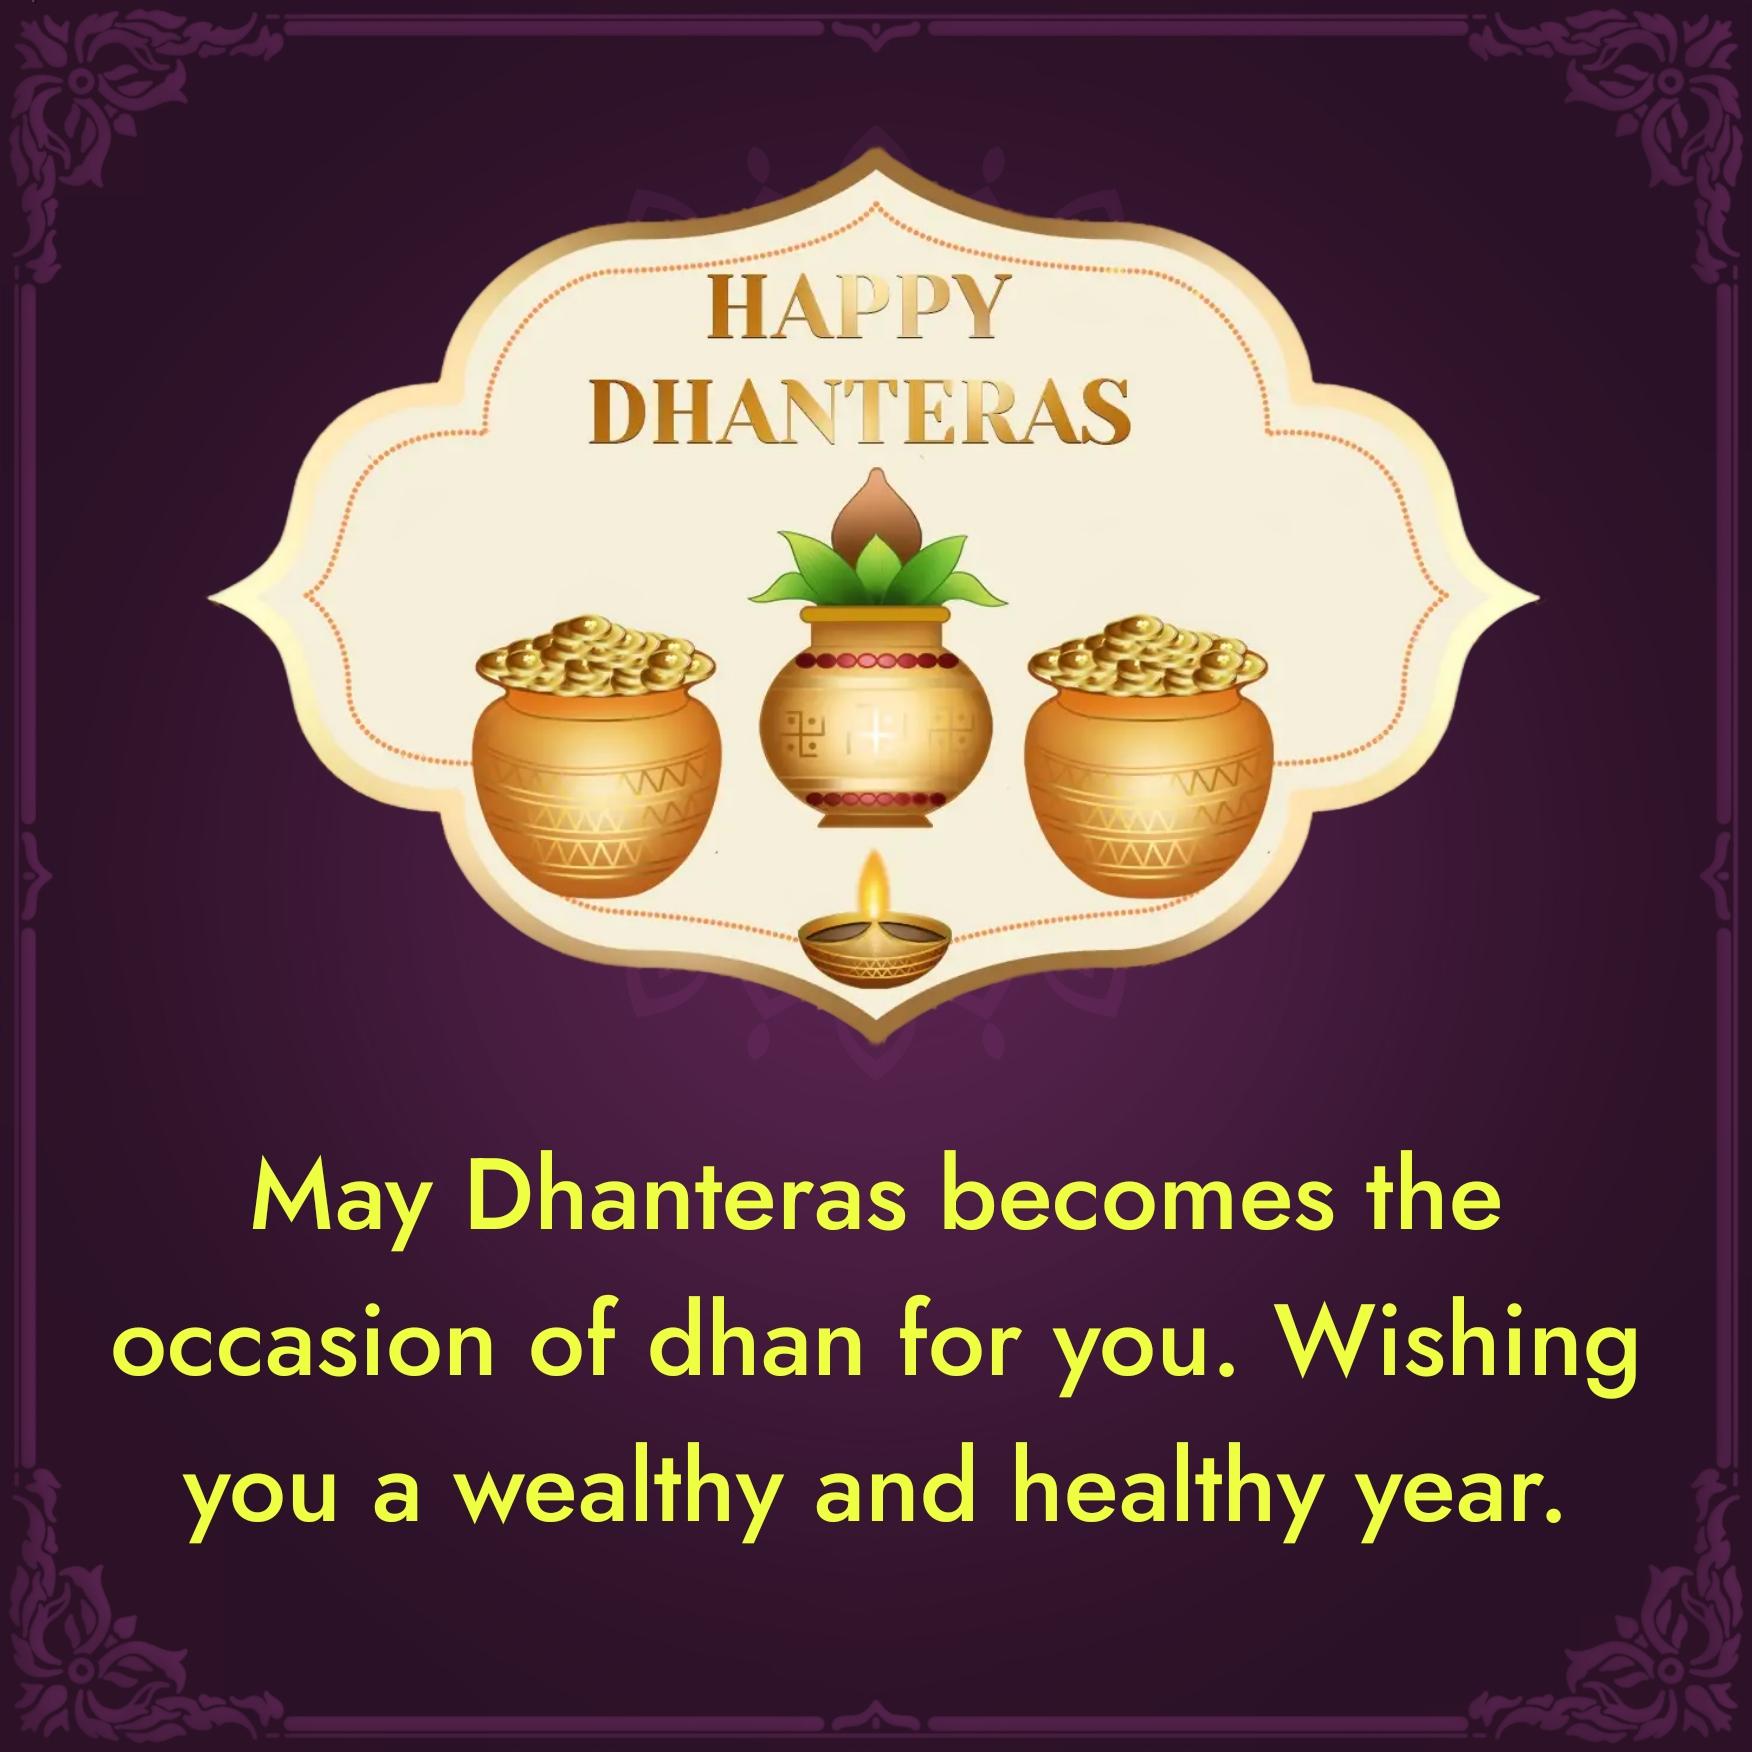 May Dhanteras becomes the occasion of dhan for you